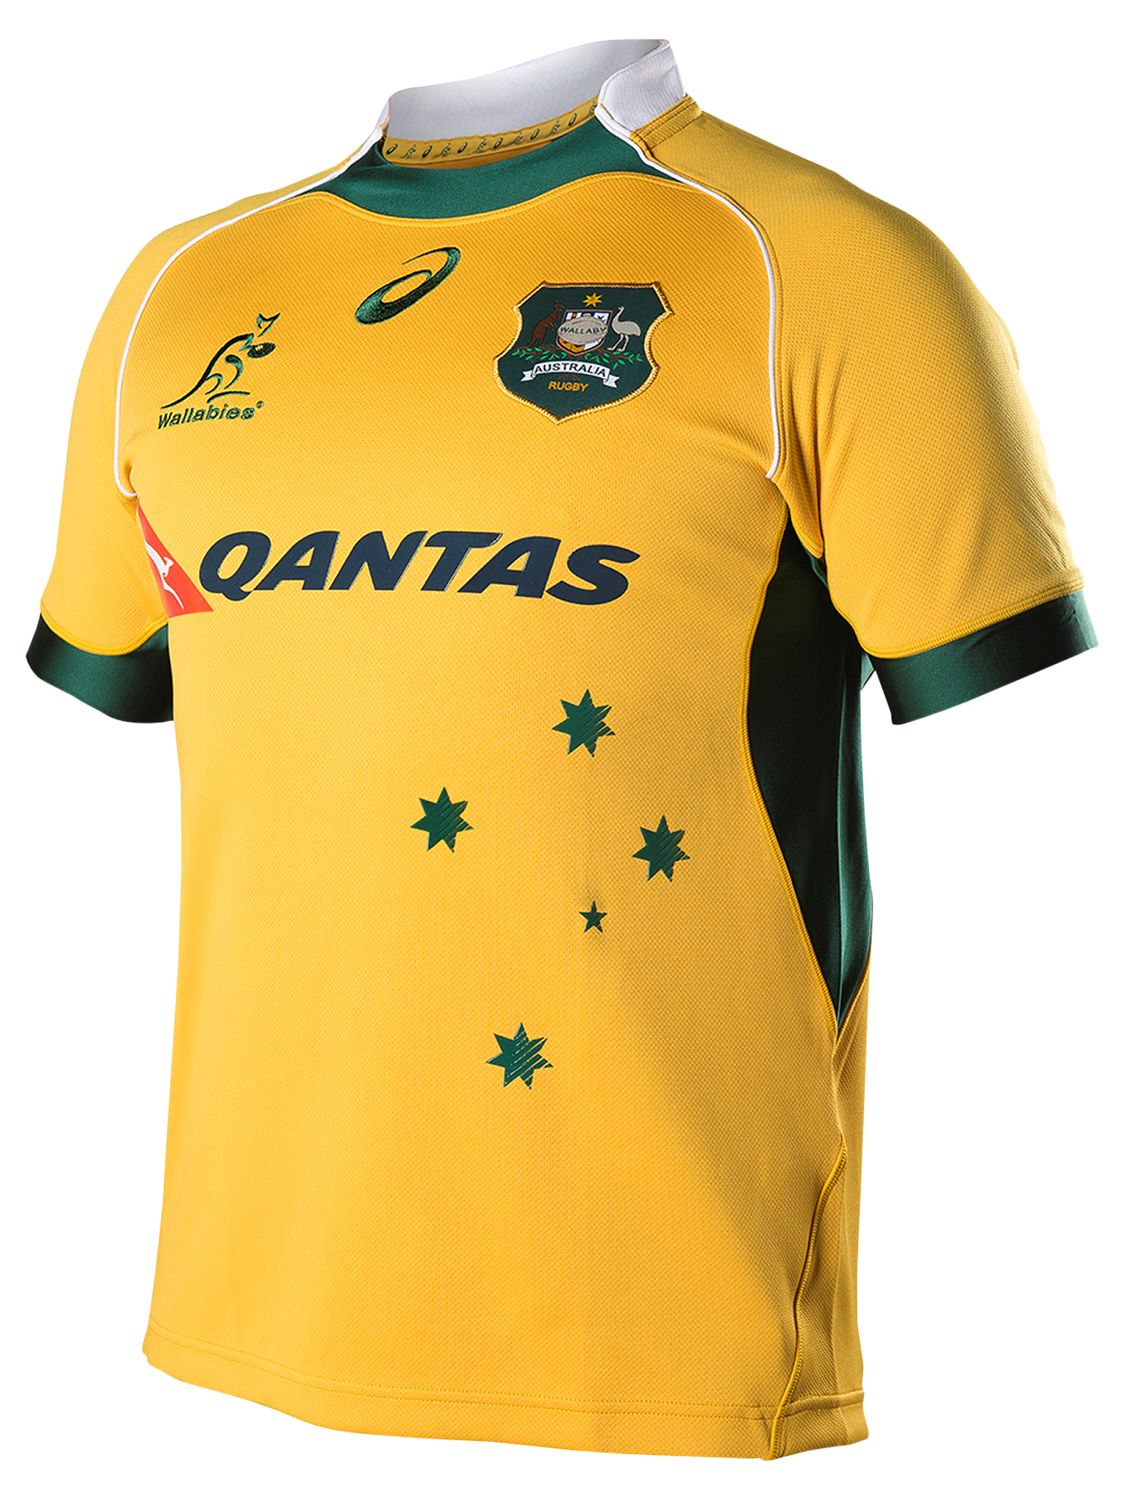 asics rugby jersey